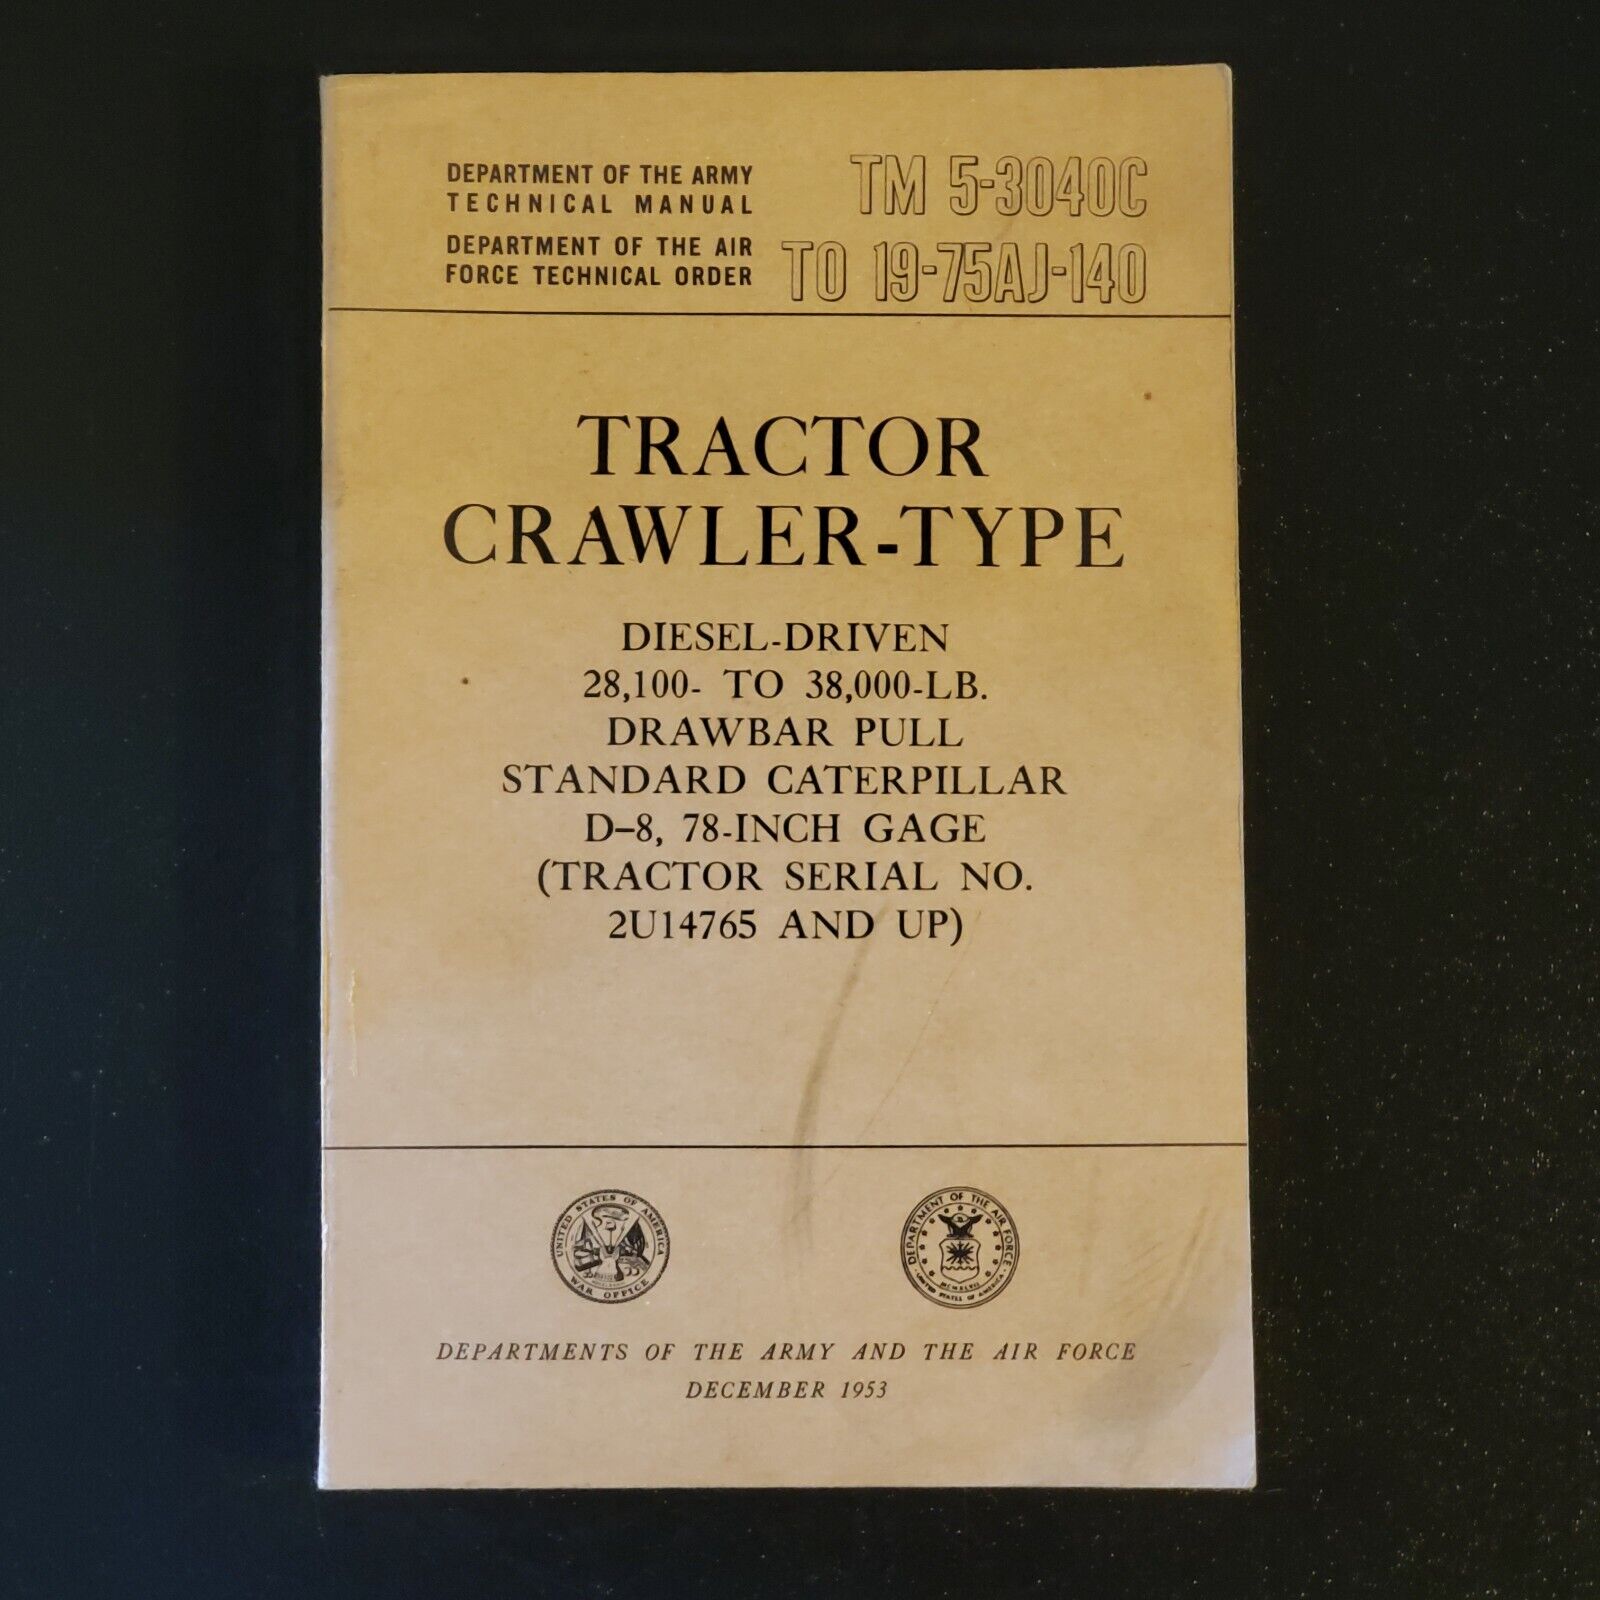 1953 Dept of the Army TM 5-3040C / Air Force TO 19-75AJ-140 Tractor Crawler